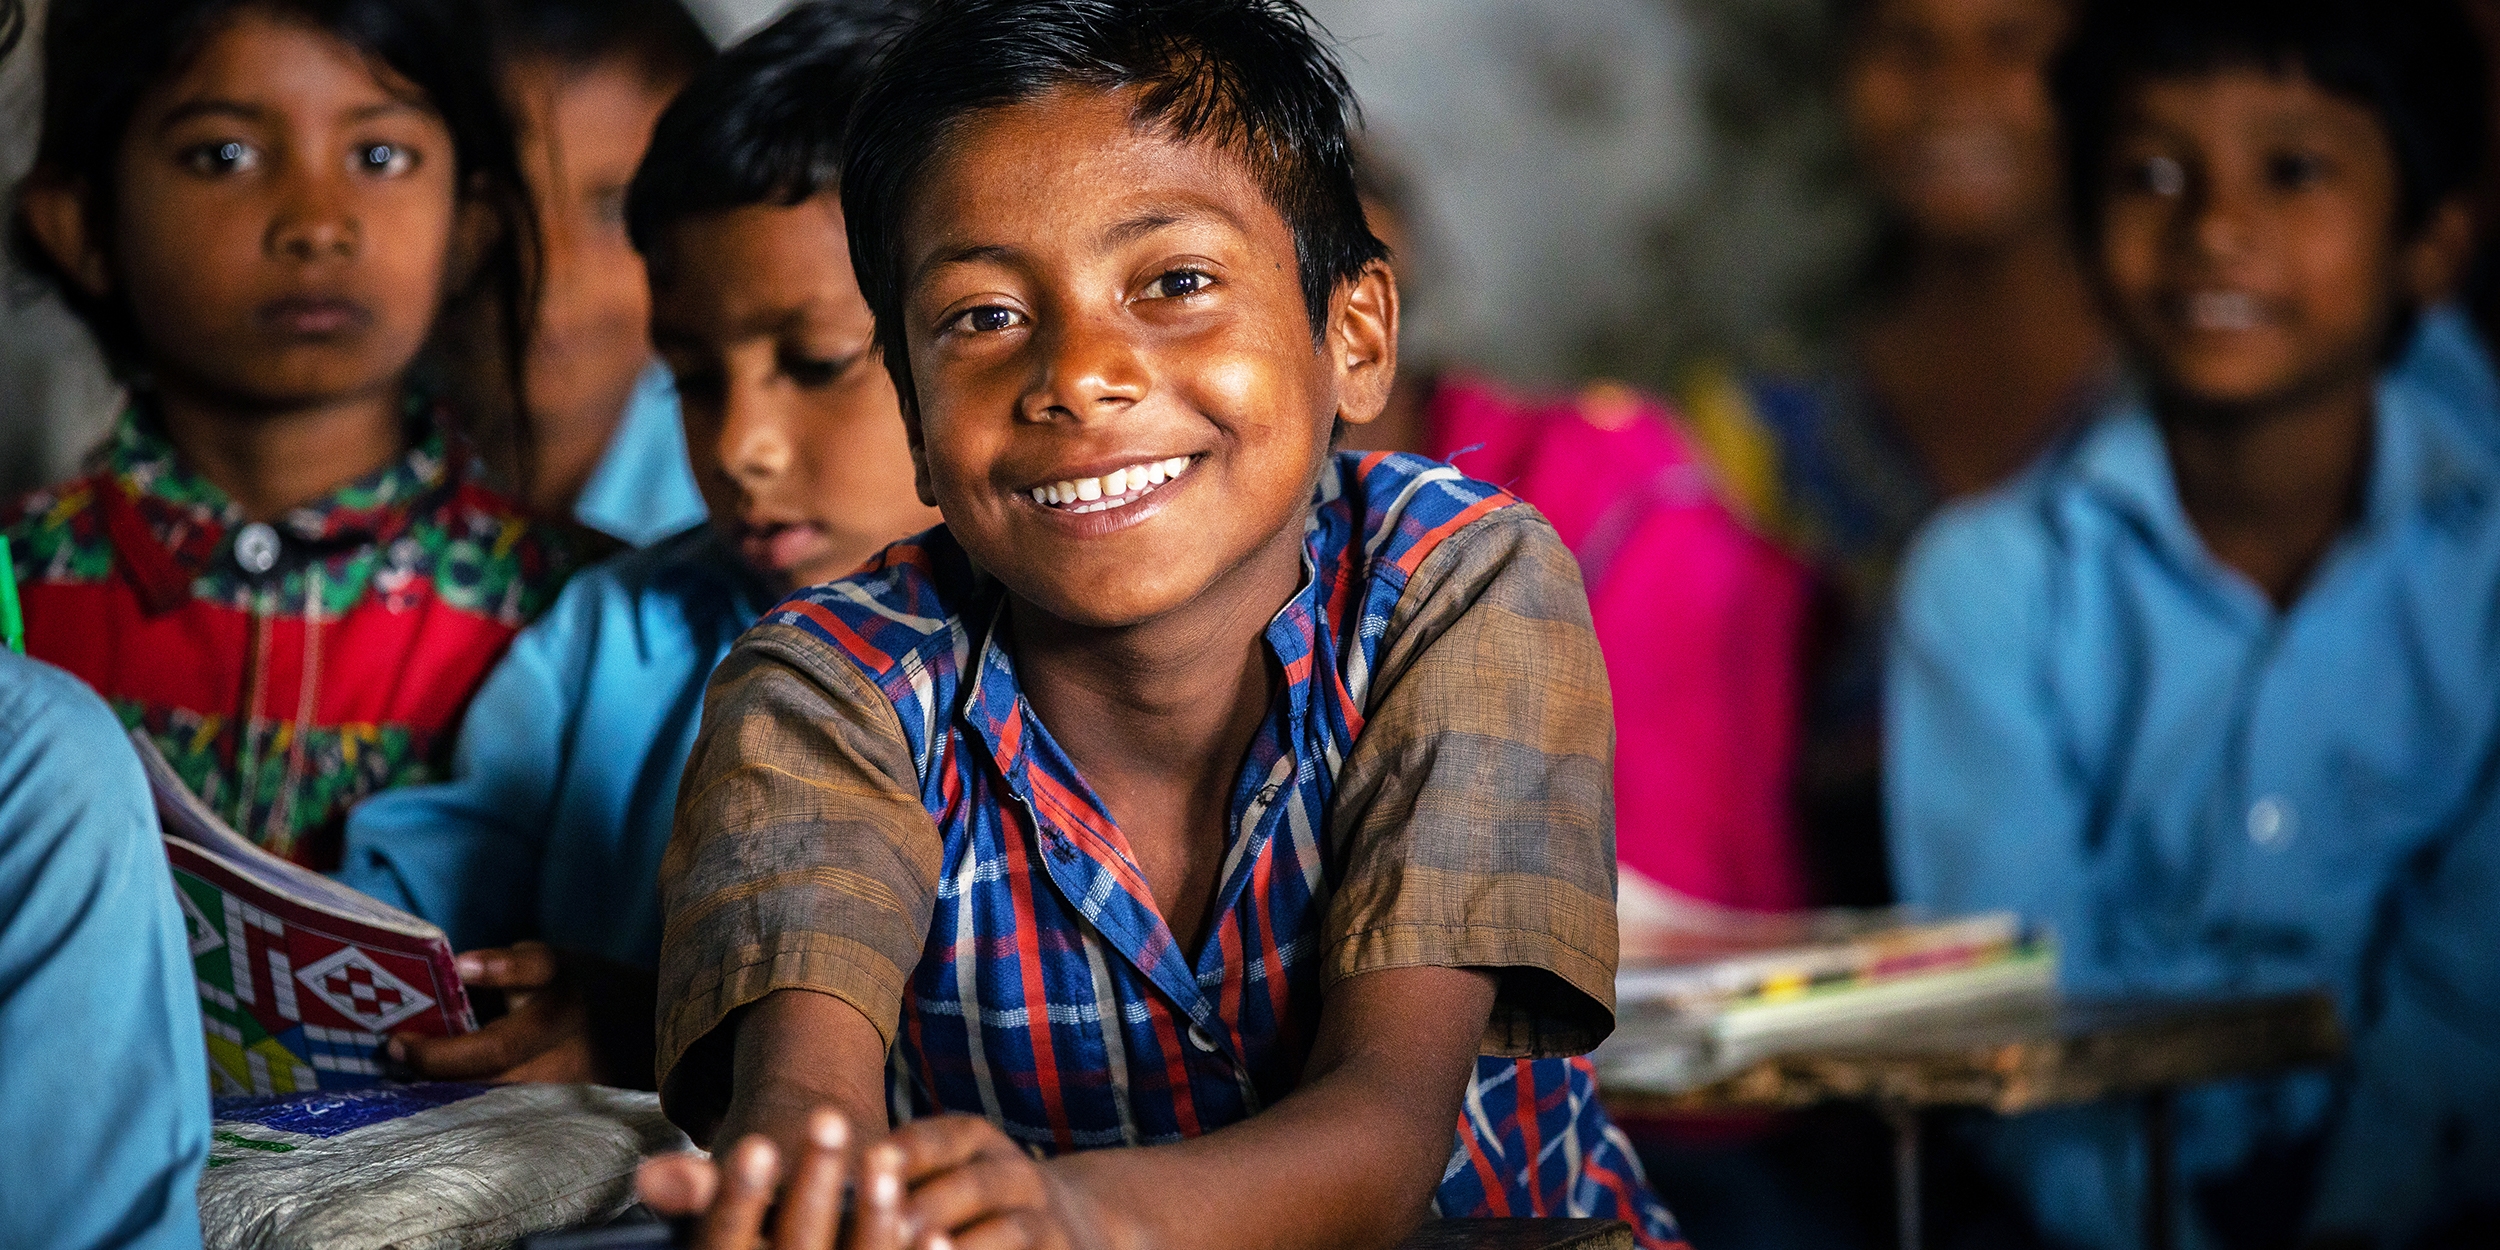 A 7-year-old boy participates in a math lesson at his community school in the Sarlahi district of Nepal. Photo credit: Victoria Zegler / Save the Children, May 2018. 